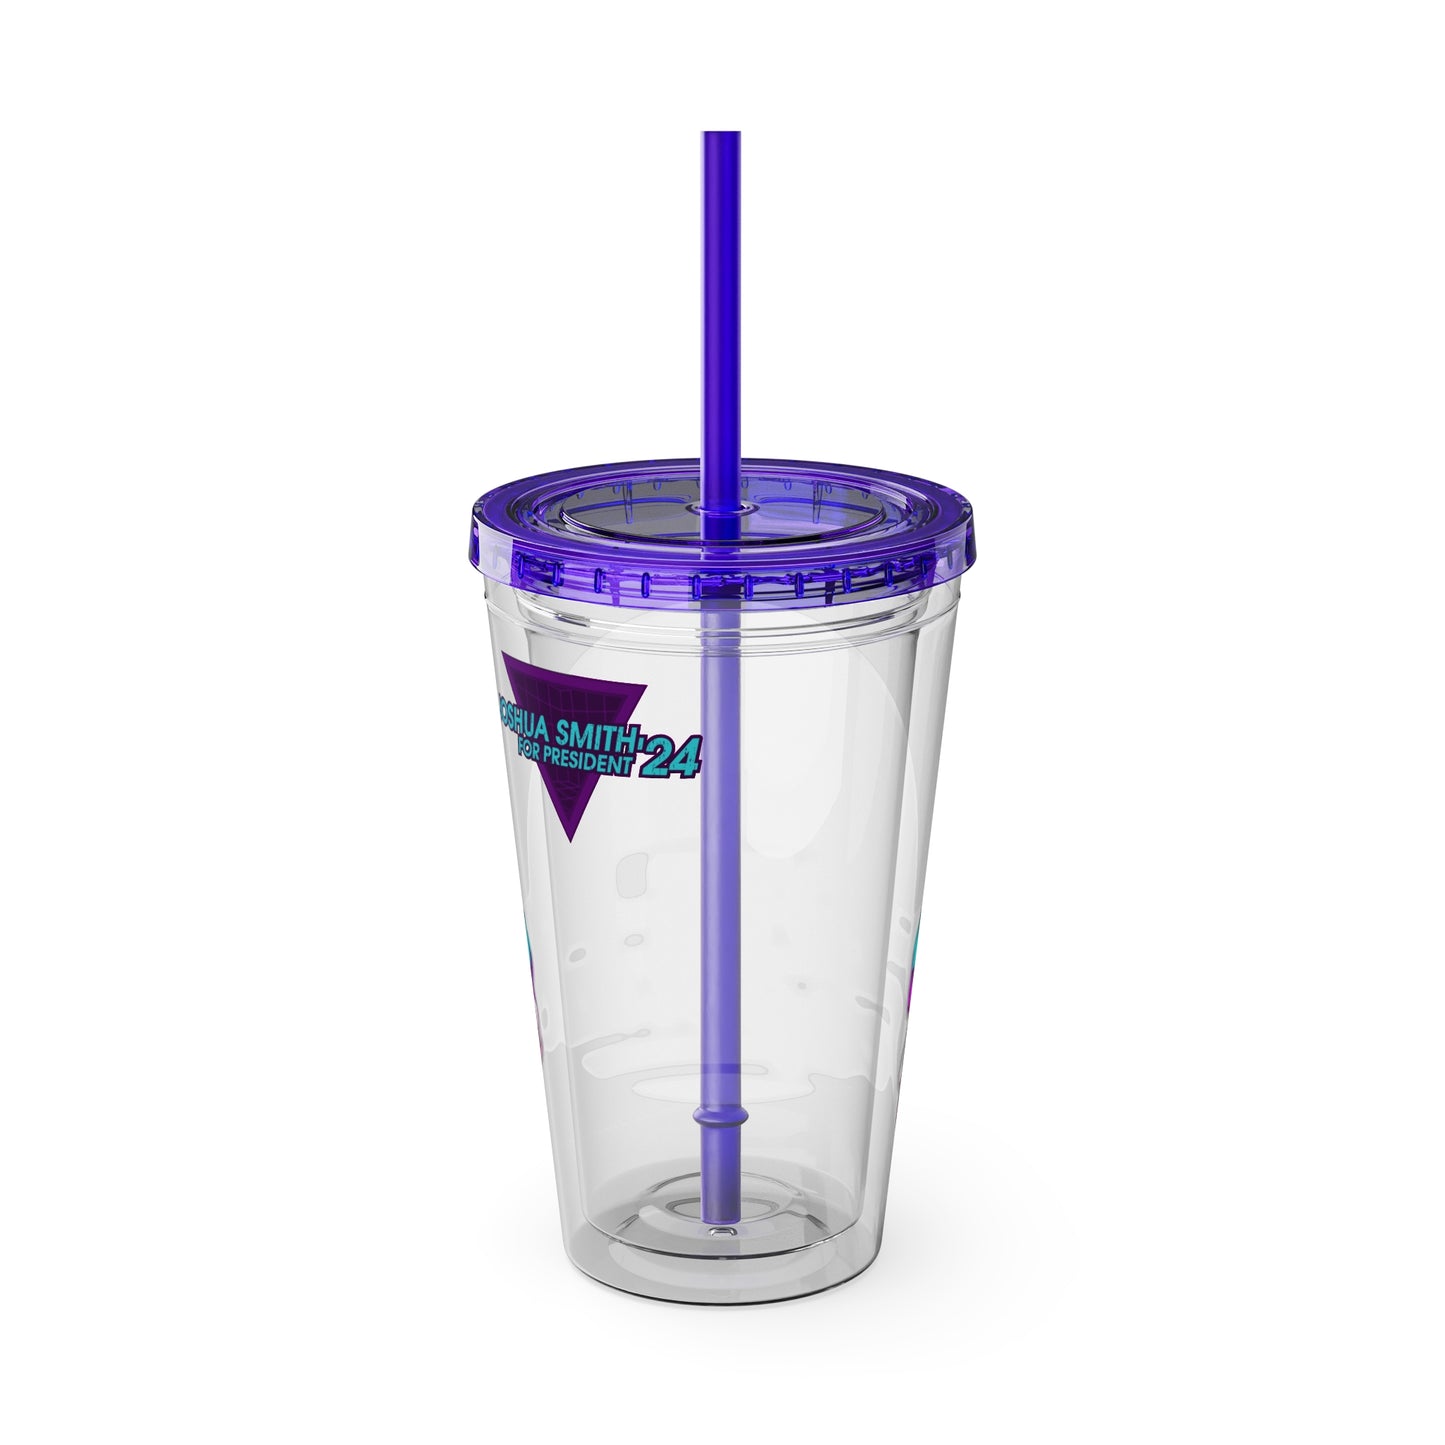 "Vote for Vengeance" Tumbler with Straw, 16oz